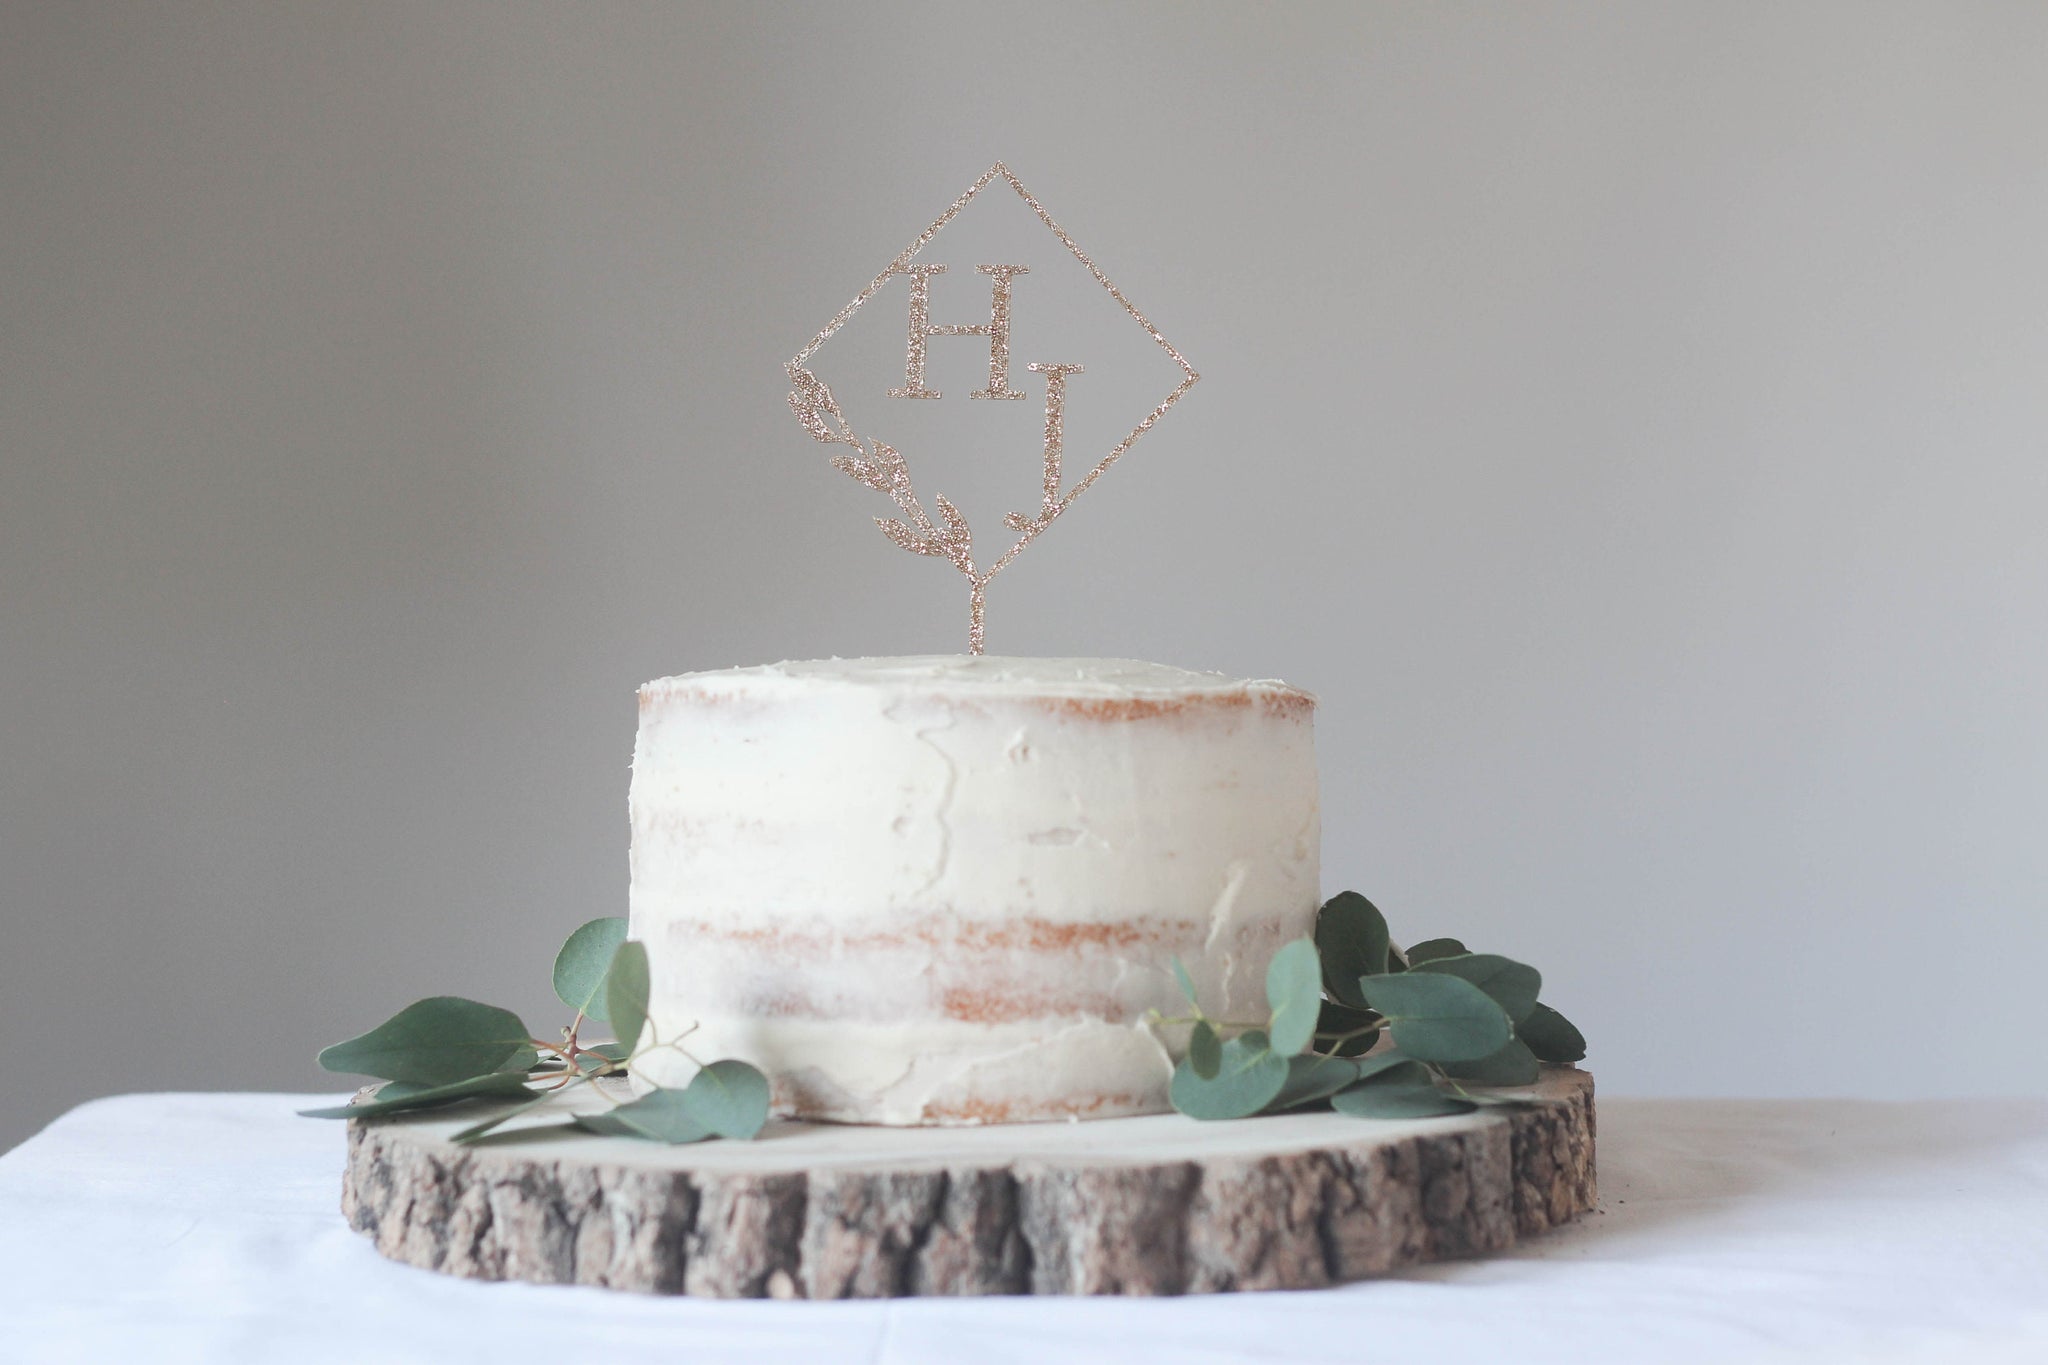 Classic Wedding Cake Topper Customised With The Bride and Groom's Initials - Glitter Gold Cake Topper